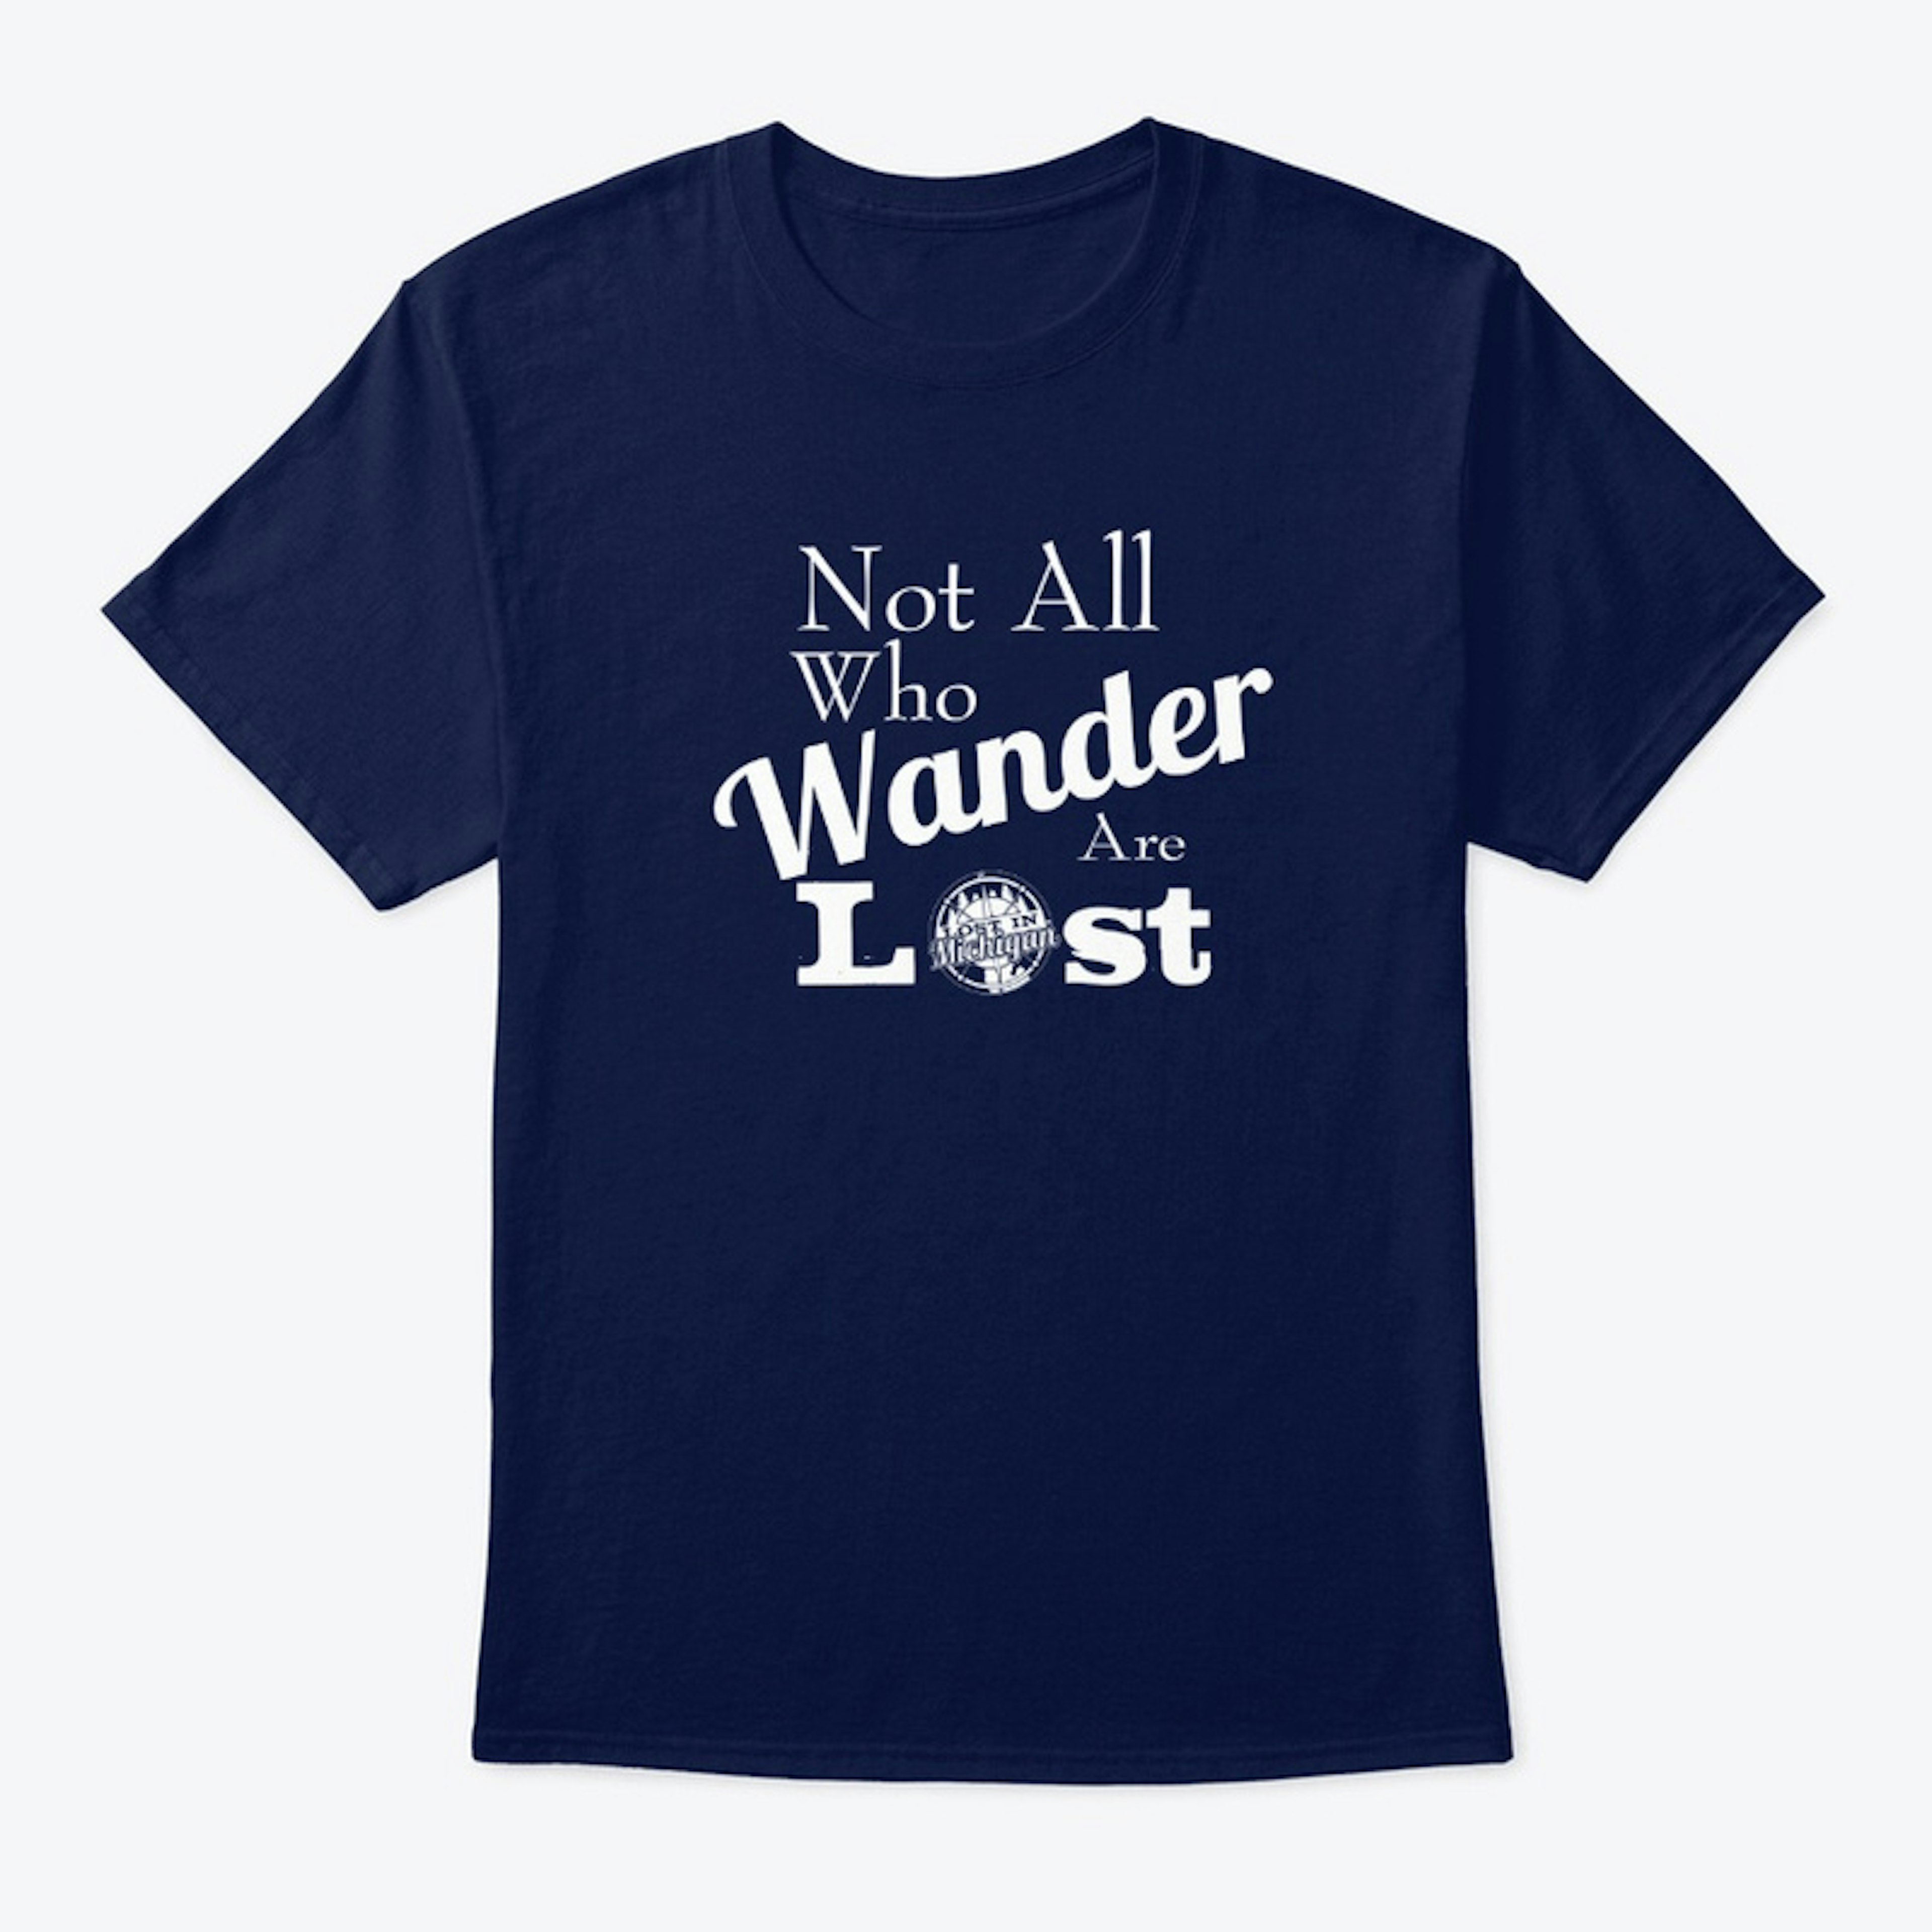 Not All Who Wander Are Lost In Michigan